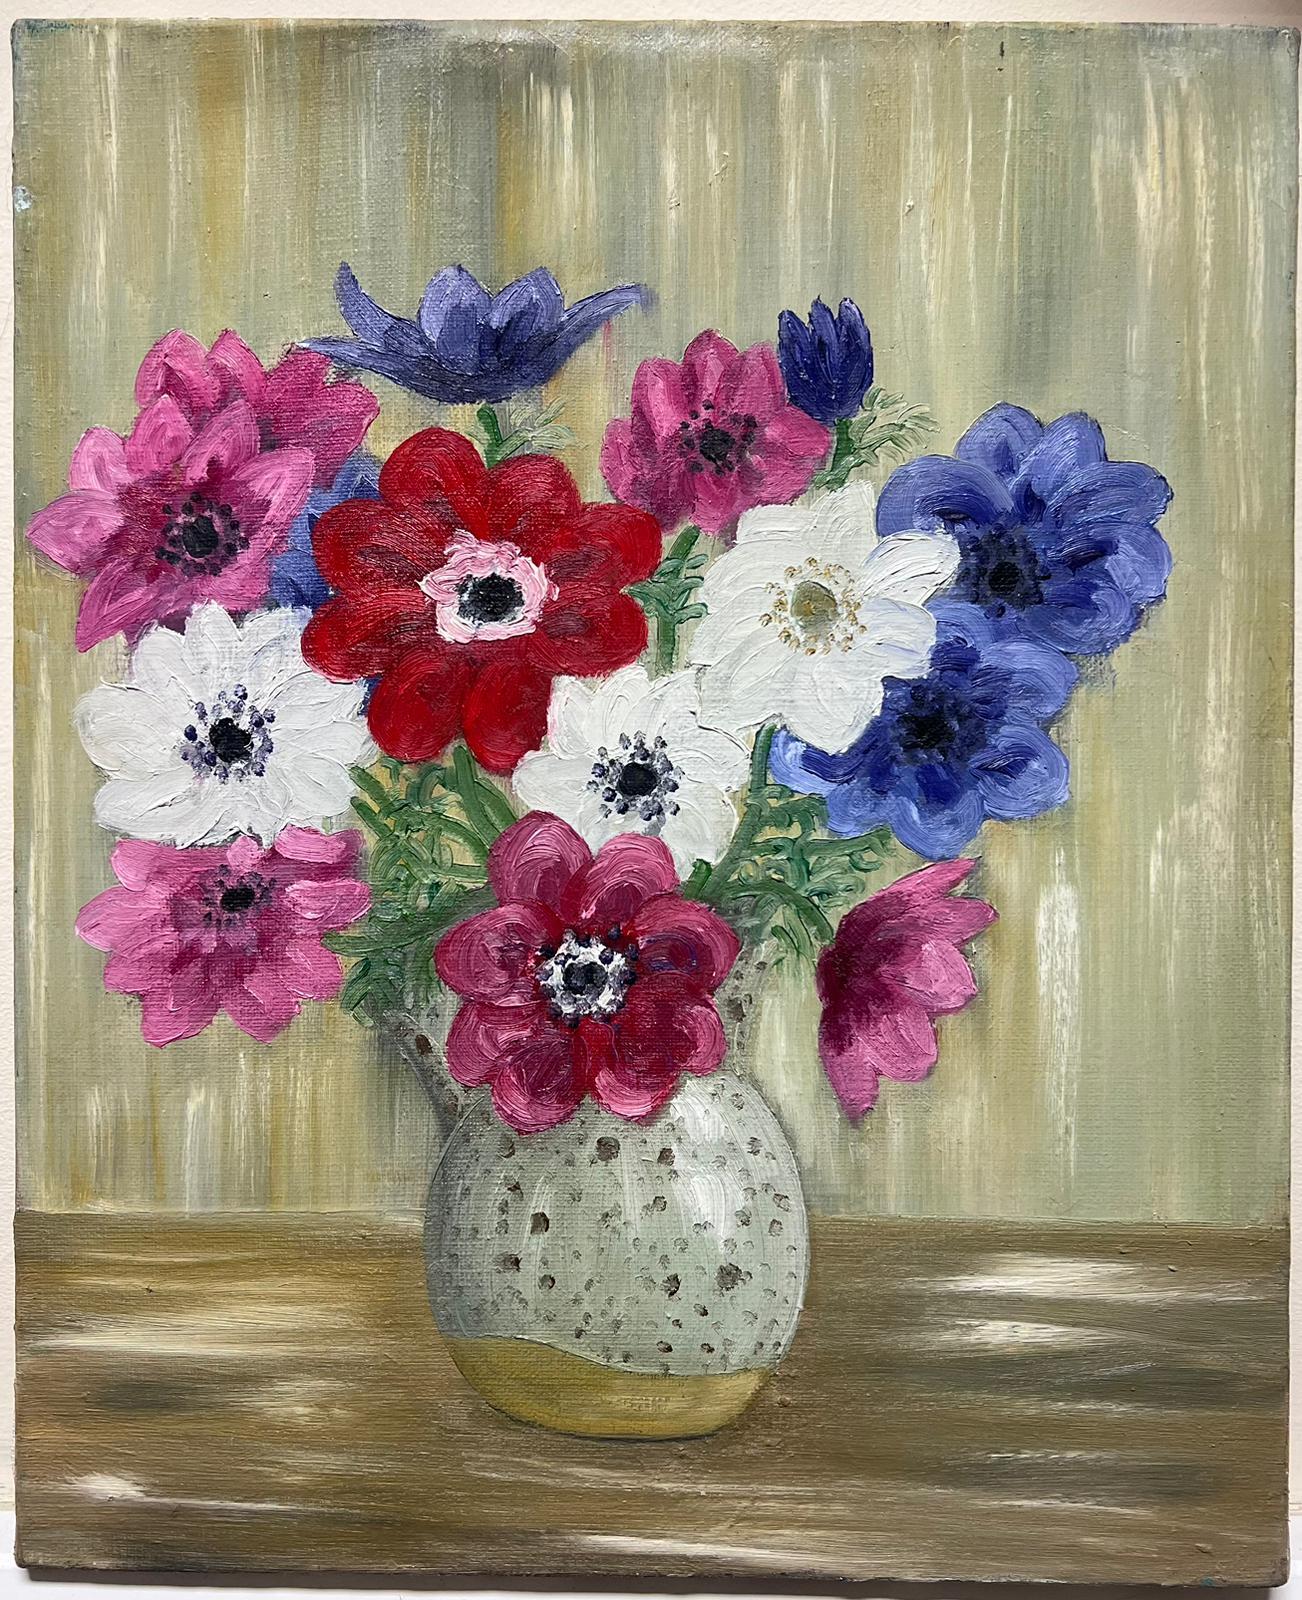 Vase de Fleurs
by Louise Alix (French, 1888-1980) *see notes below
provenance stamp to the back 
oil painting on canvas, unframed
measures: 18.5 high by 15 inches wide
condition: overall very good and sound, a few scuffs and marks to the surface and